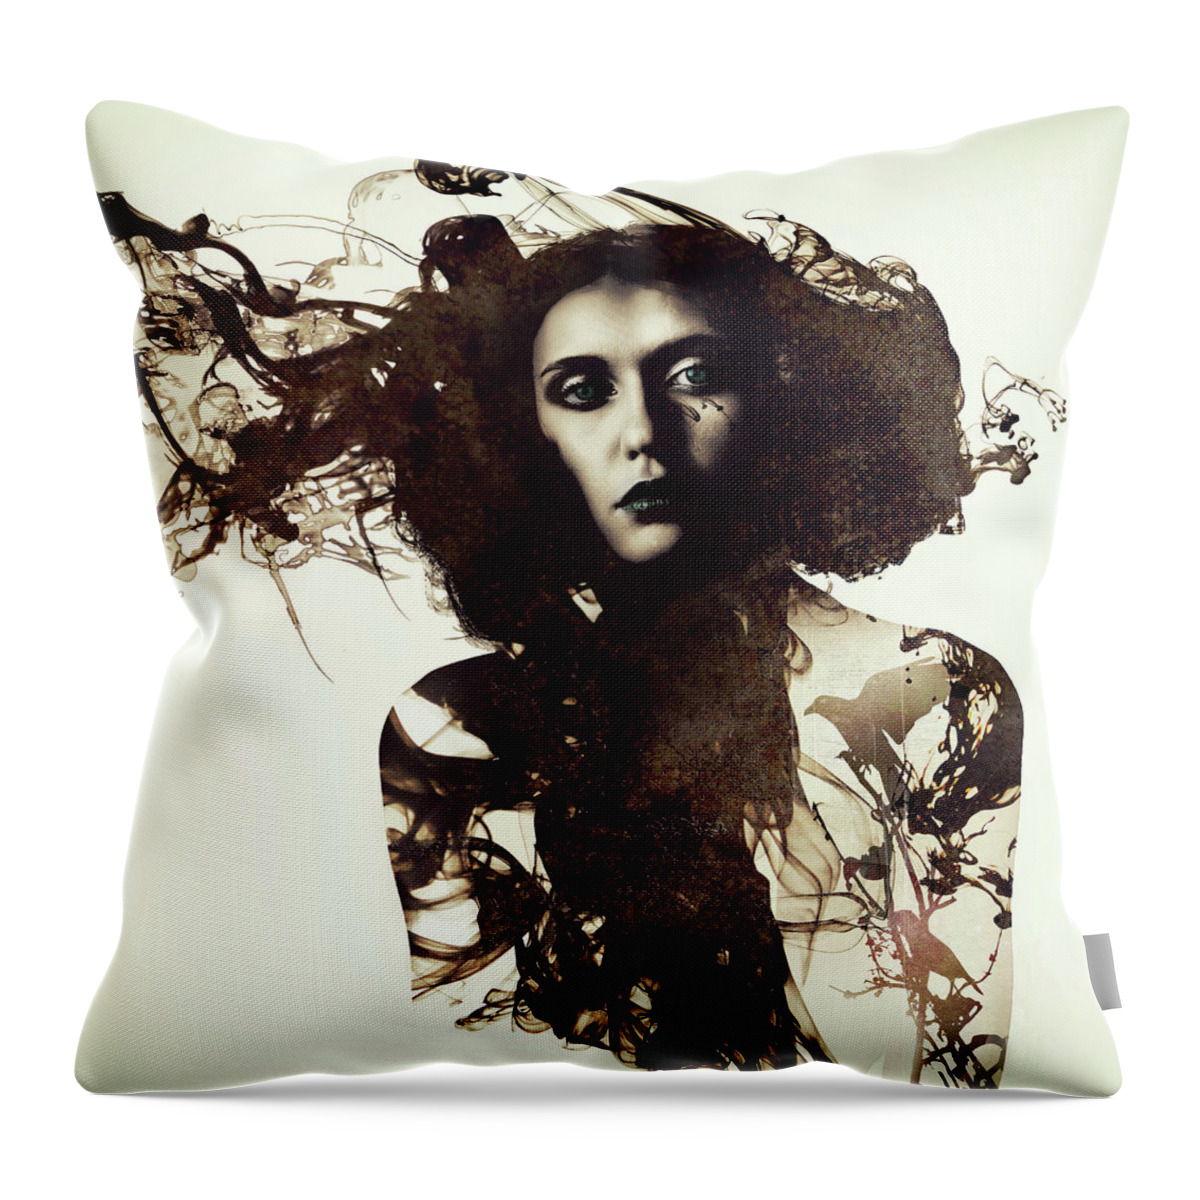 Portrait Abstract Flow In Surreal Dream Throw Pillow featuring the digital art Free Flow by Katherine Smit